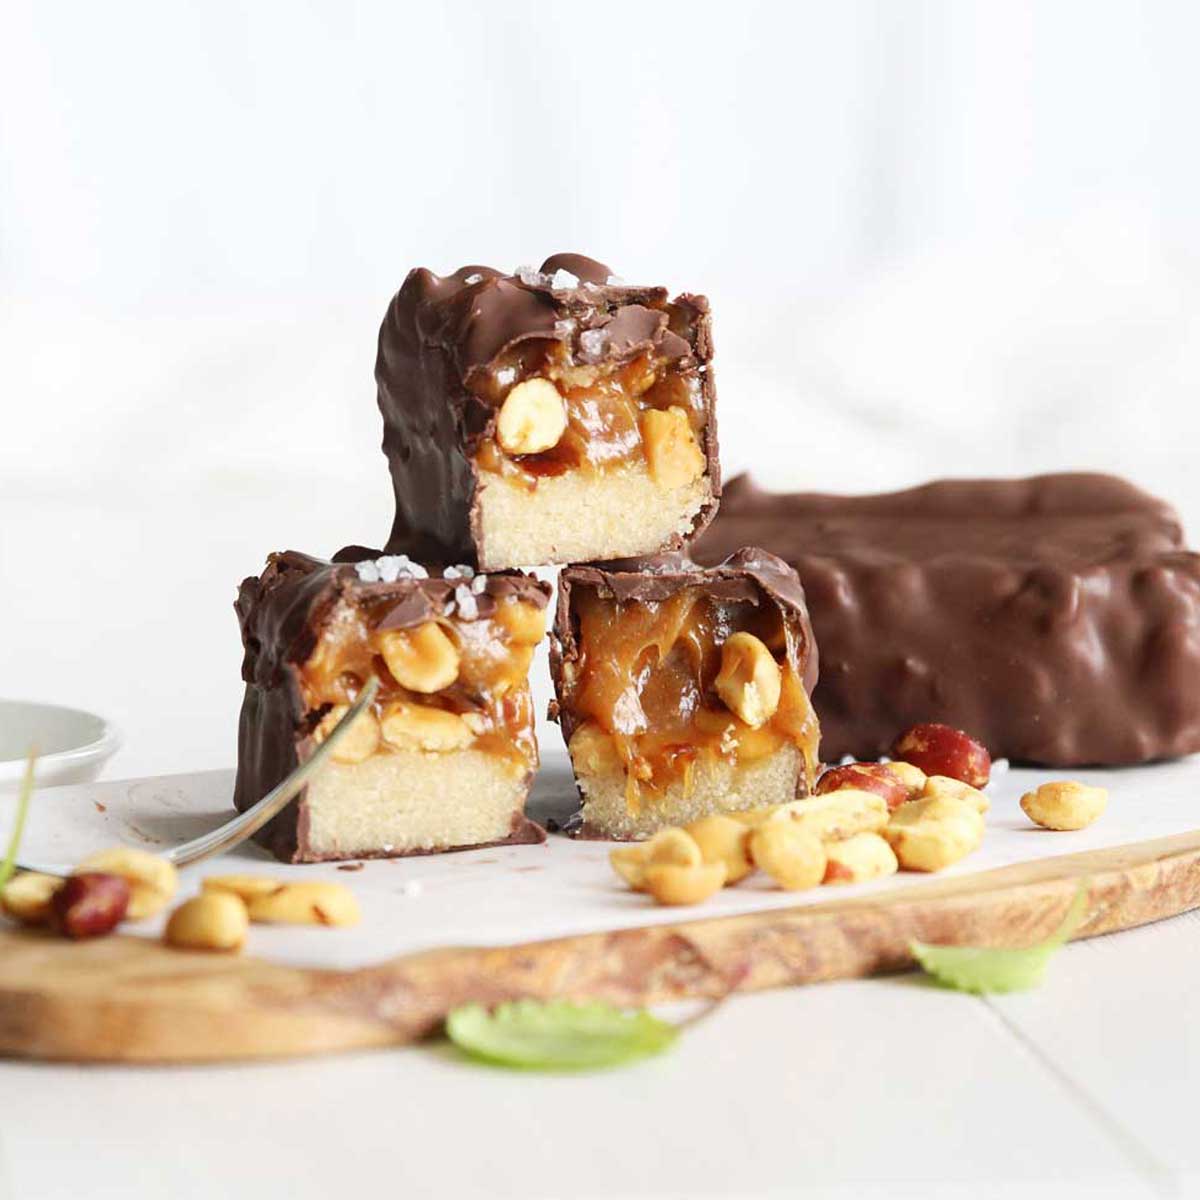 Guilt-Free Keto Snickers Protein Bars made with Collagen Peptides Powder - Almond Joy Protein Bars